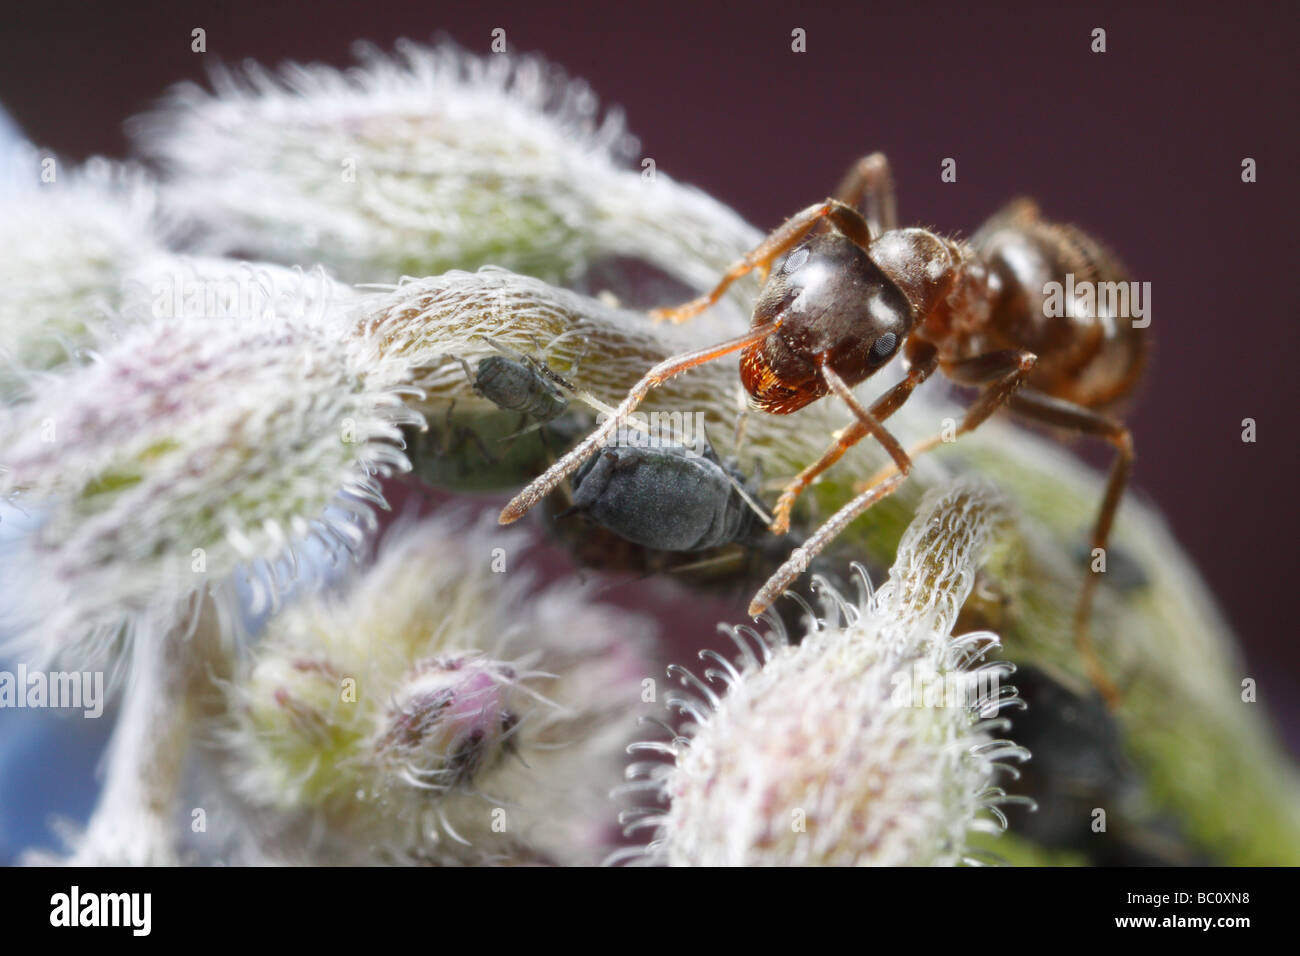 Lasius niger, the black garden ant, and aphids (aphis fabae). The flower is a borage or star flower. Stock Photo